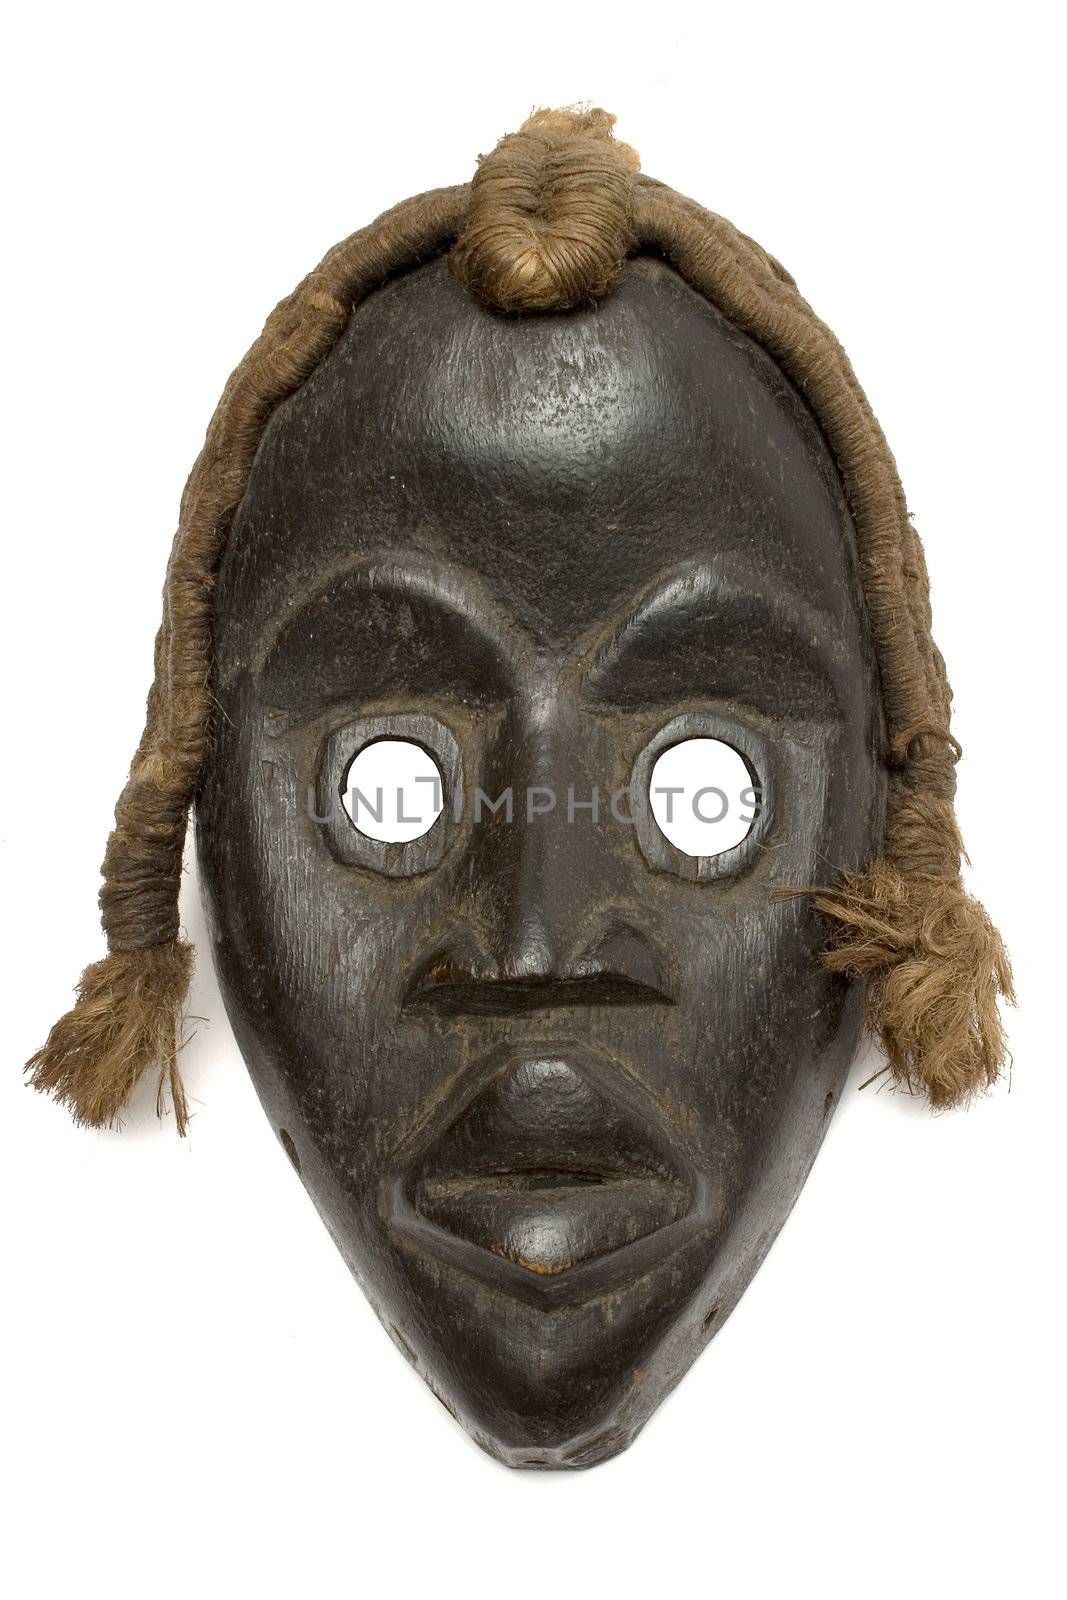 Antique mask isolated on a white background. File contains clipping path.